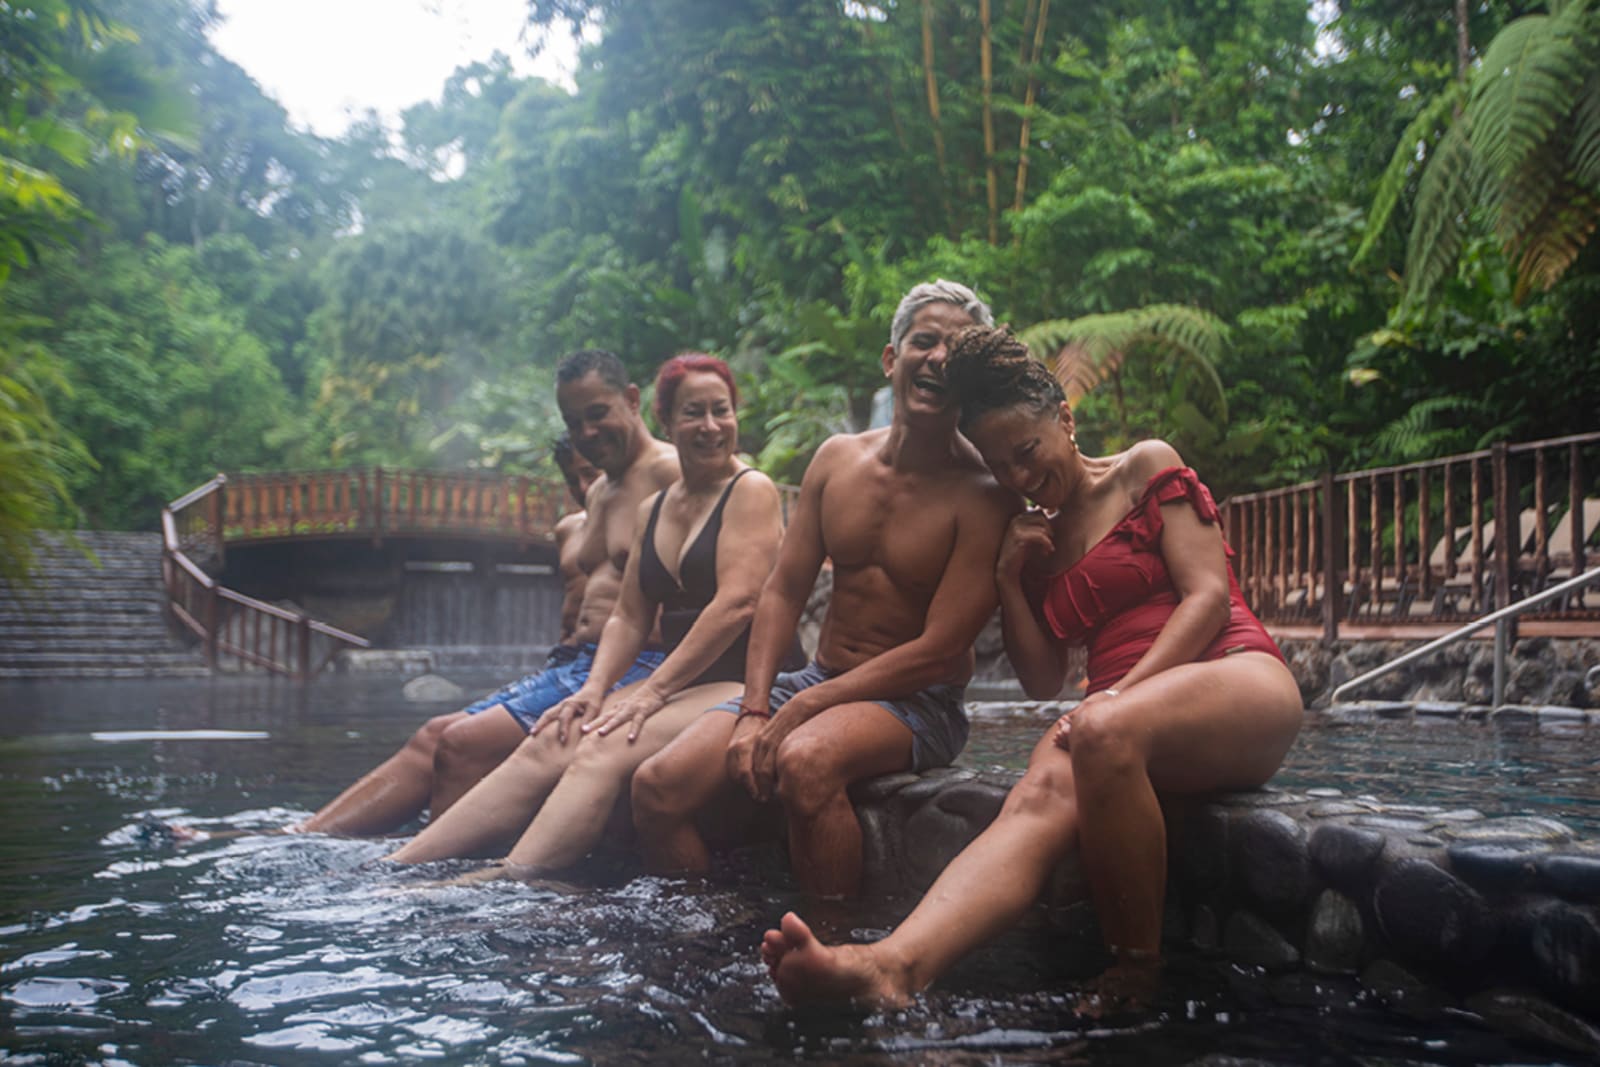 A group on a tour enjoying a hot spring in Costa Rica